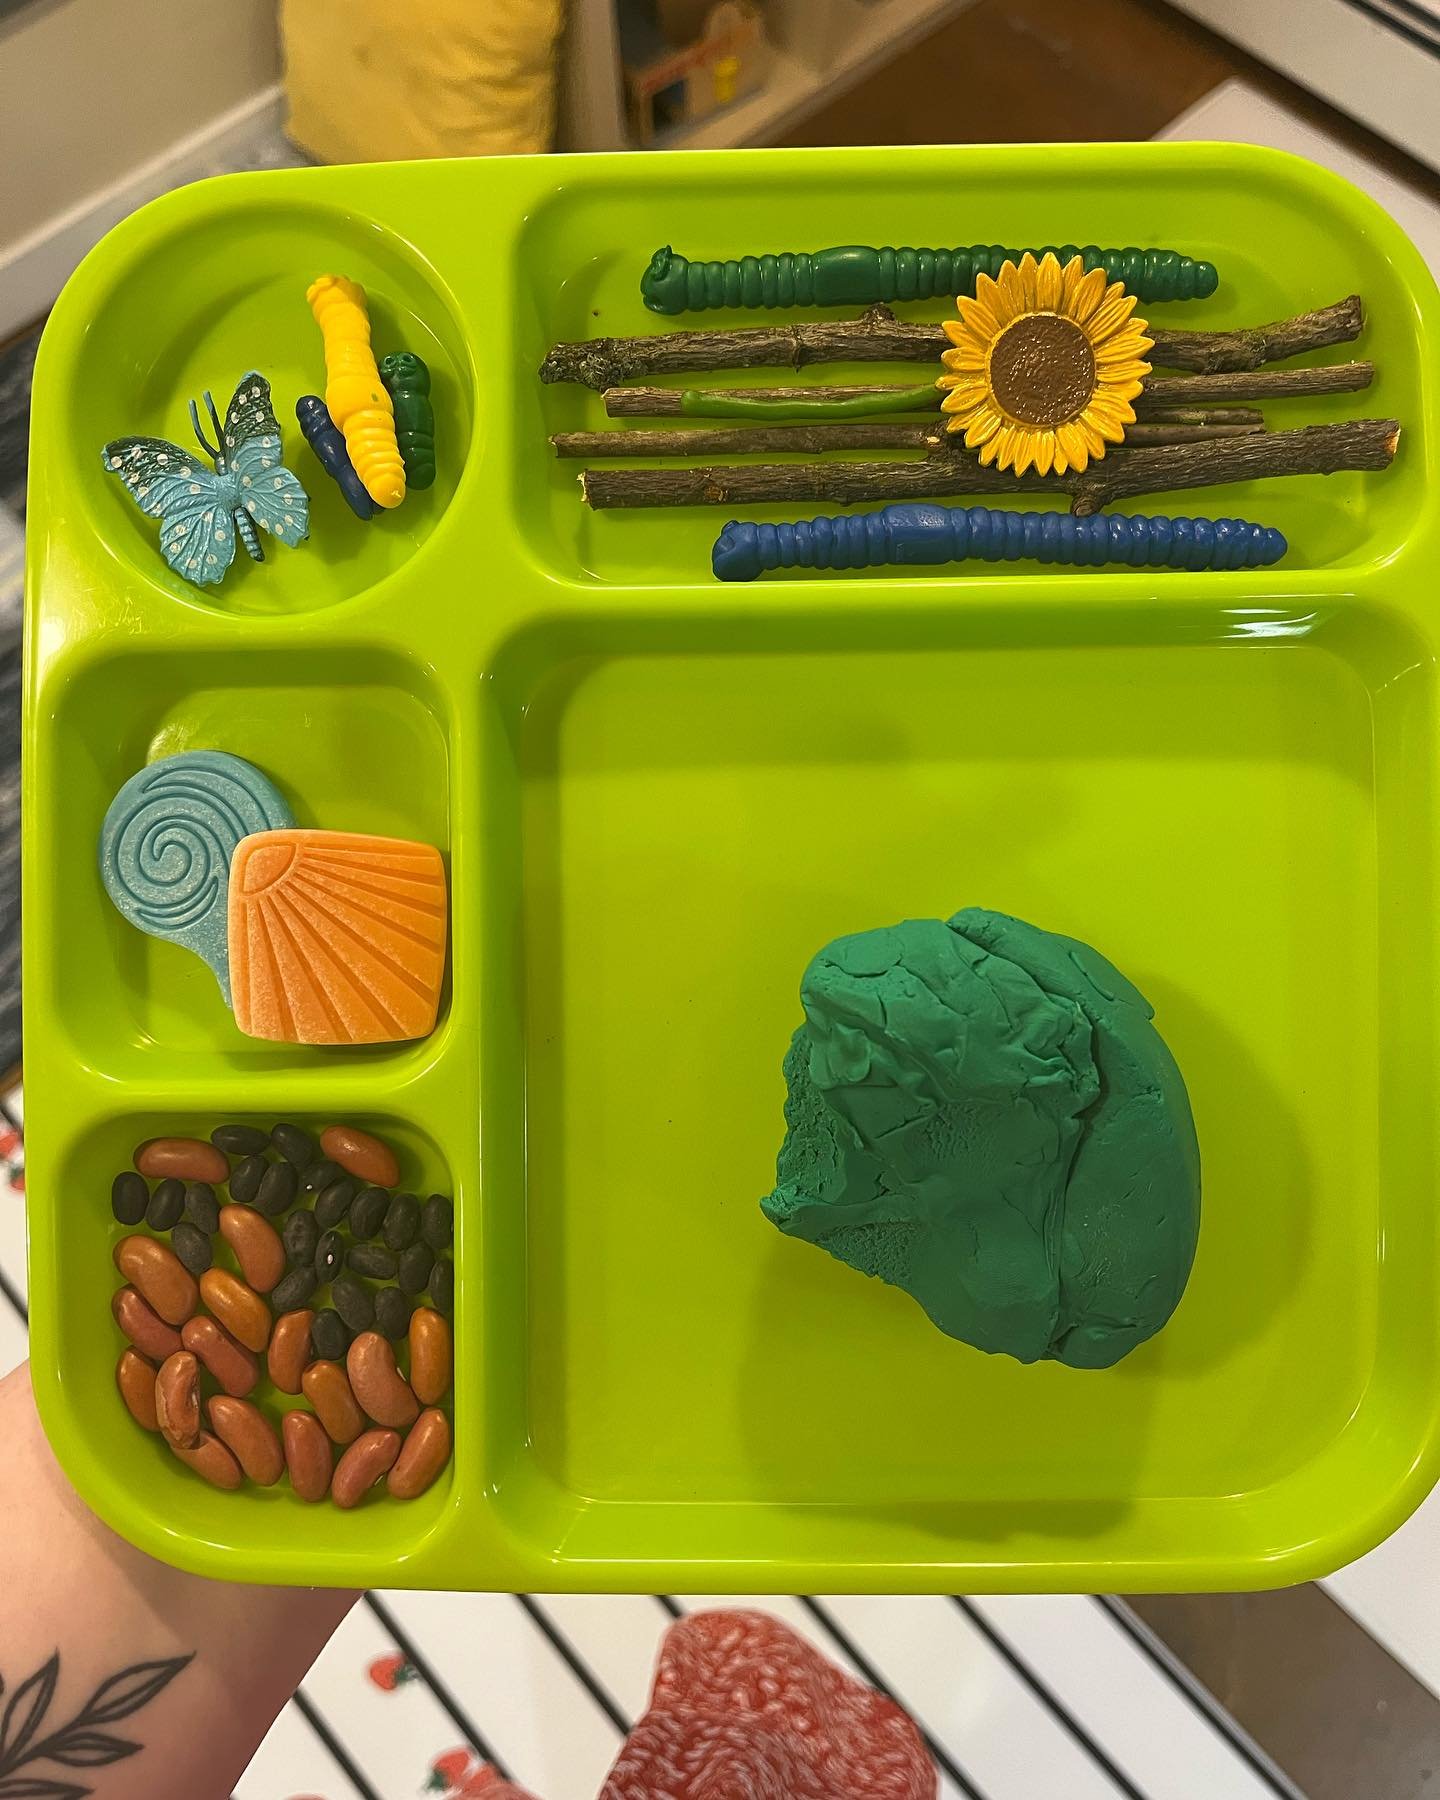 Check out these activities we did for Earth week at TLP! Earth themed play dough exploration! And more Earth art projects! 🌎🌍🌏

#tigerlilypreschool #preschoolart #earthday #playdough #earthdayplaydough #earthdayart #preschoolearthday #seattlepresc